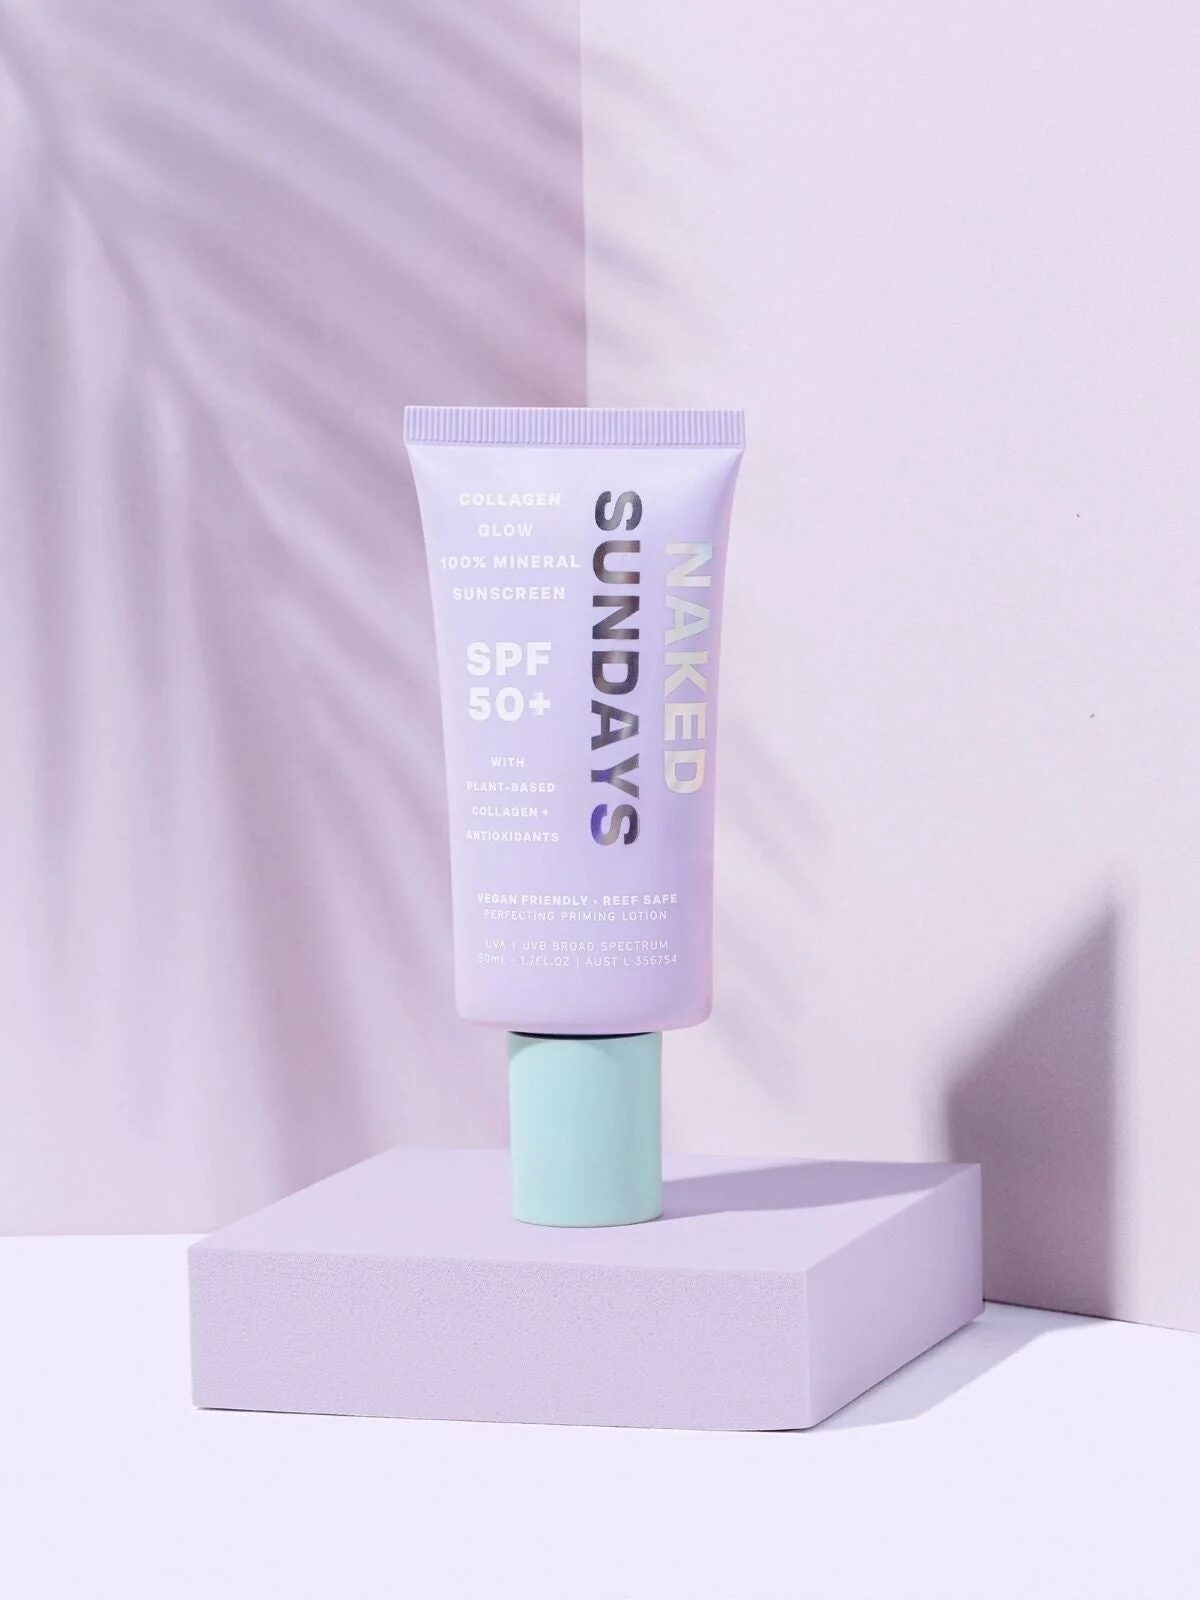 The product is propped on a lavender platform against a lavender background